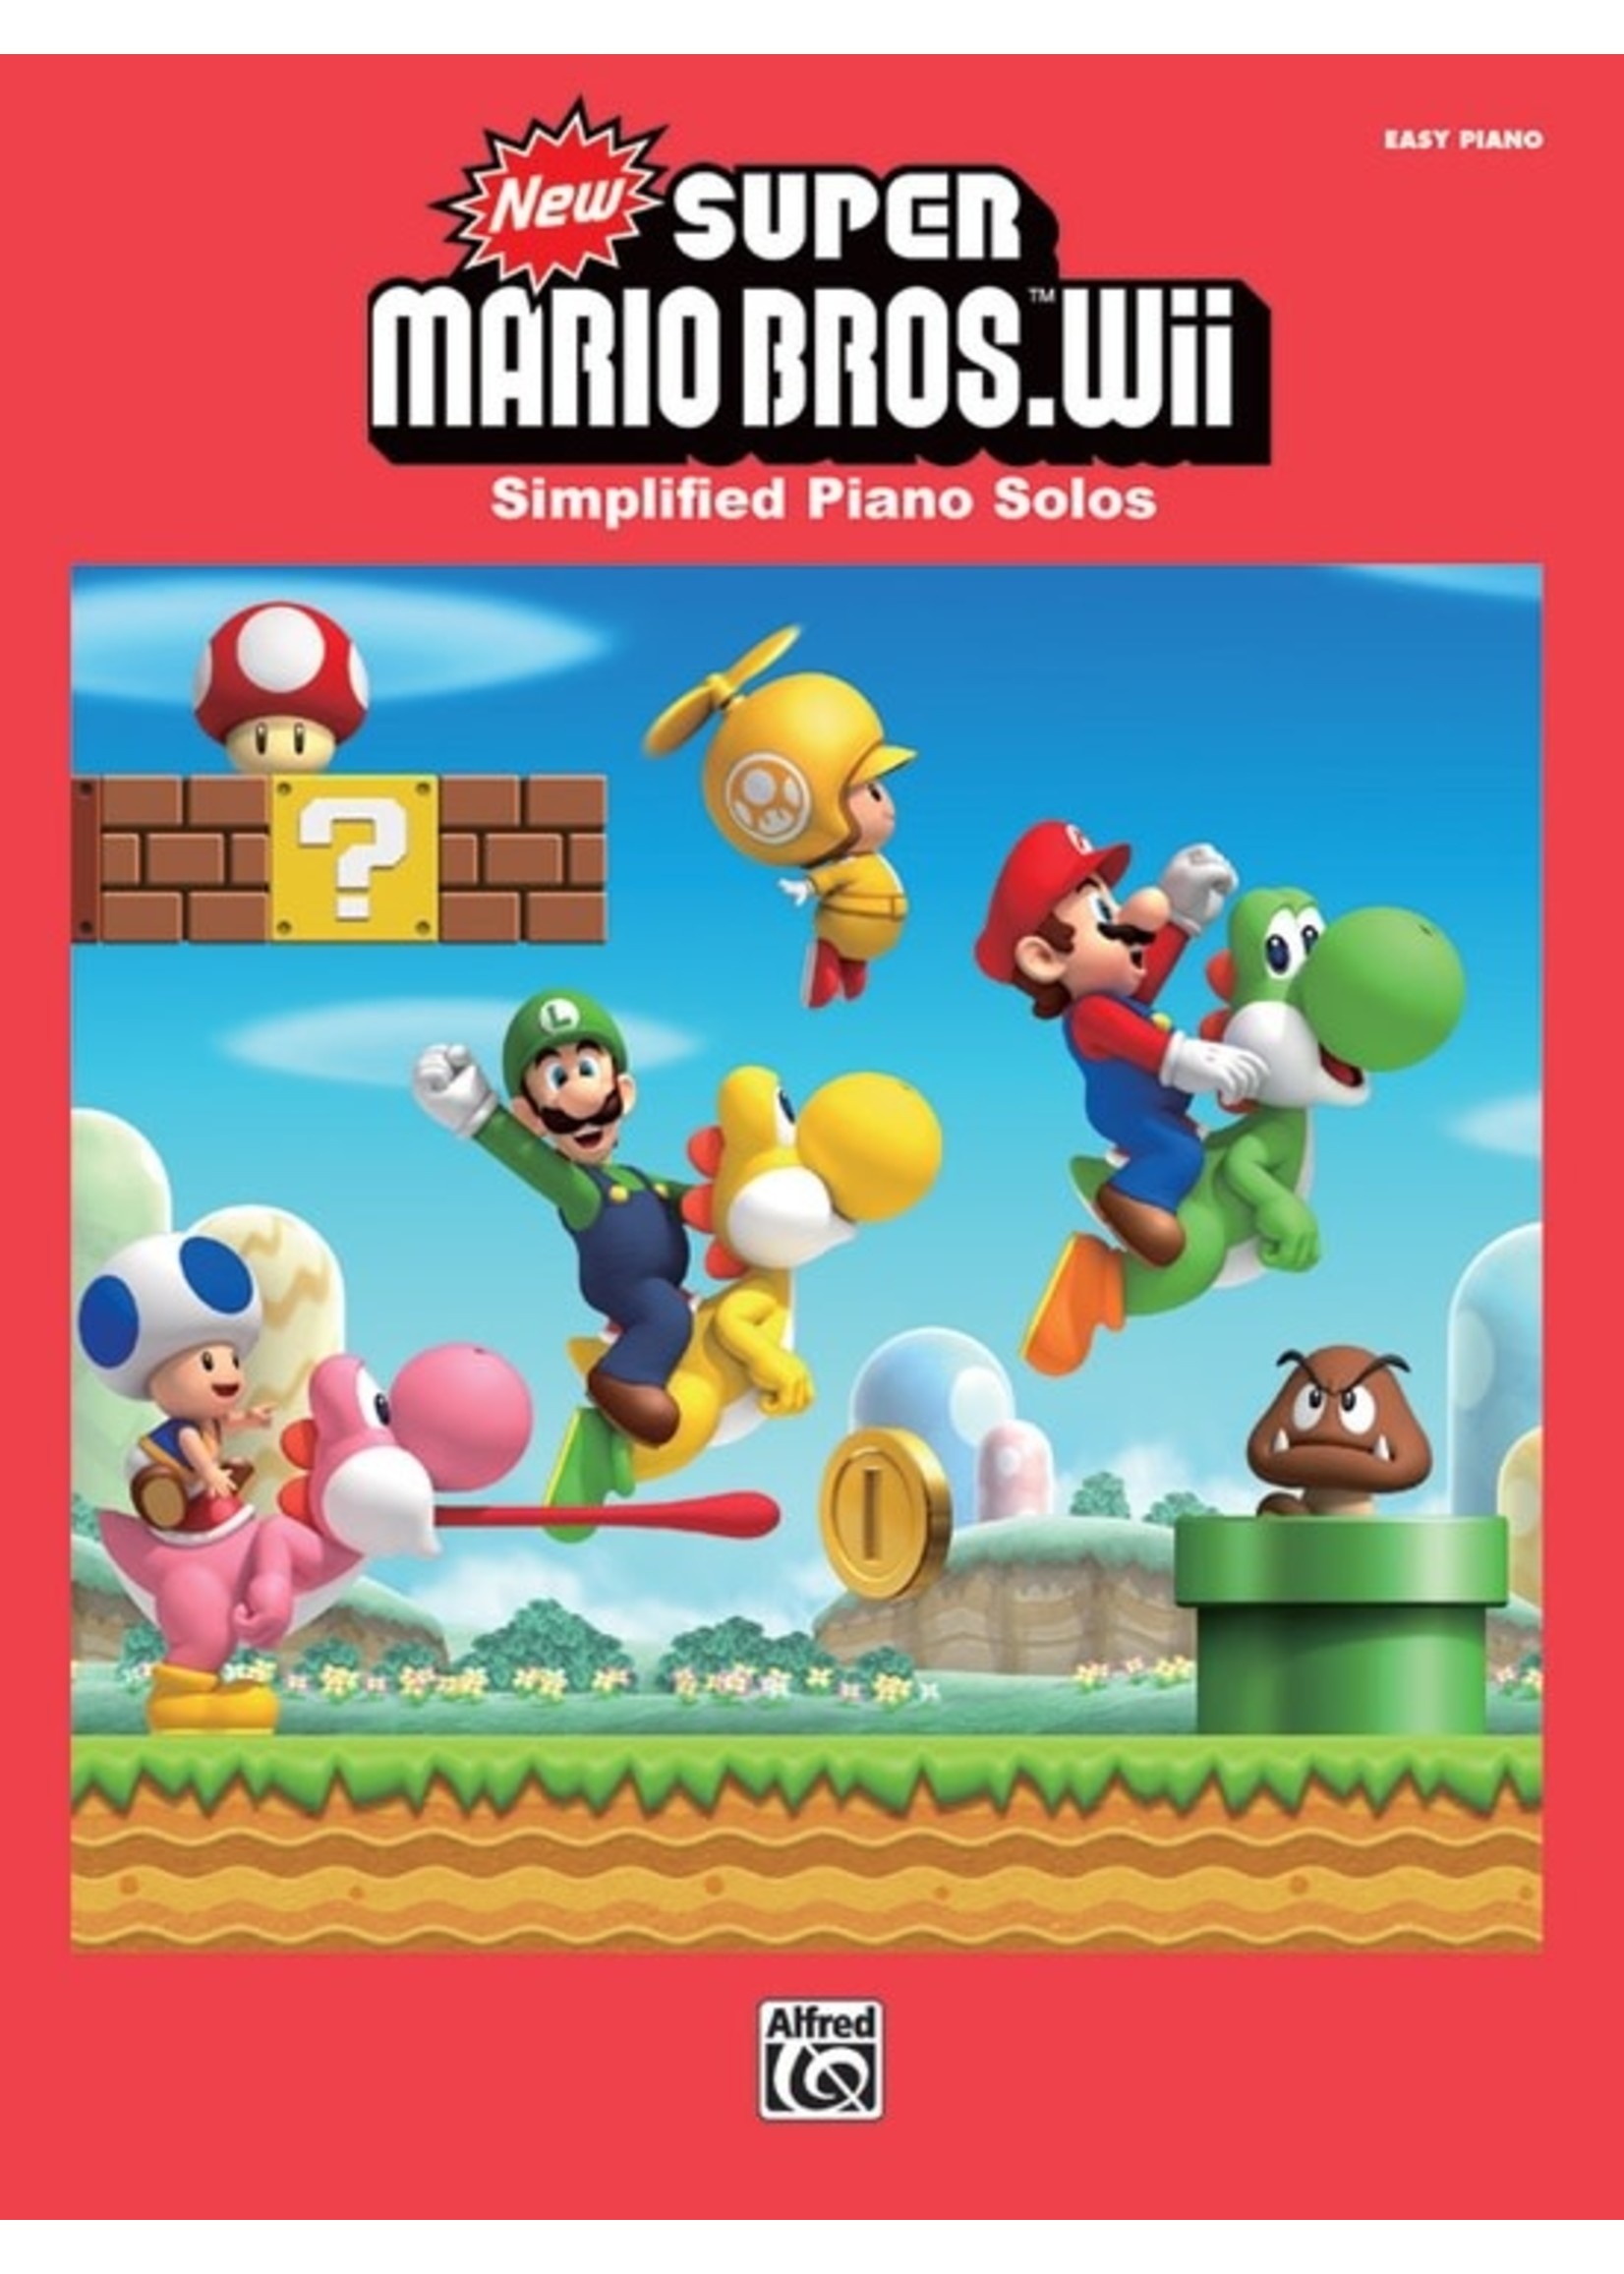 Alfred New Super Mario Bros Wii EP